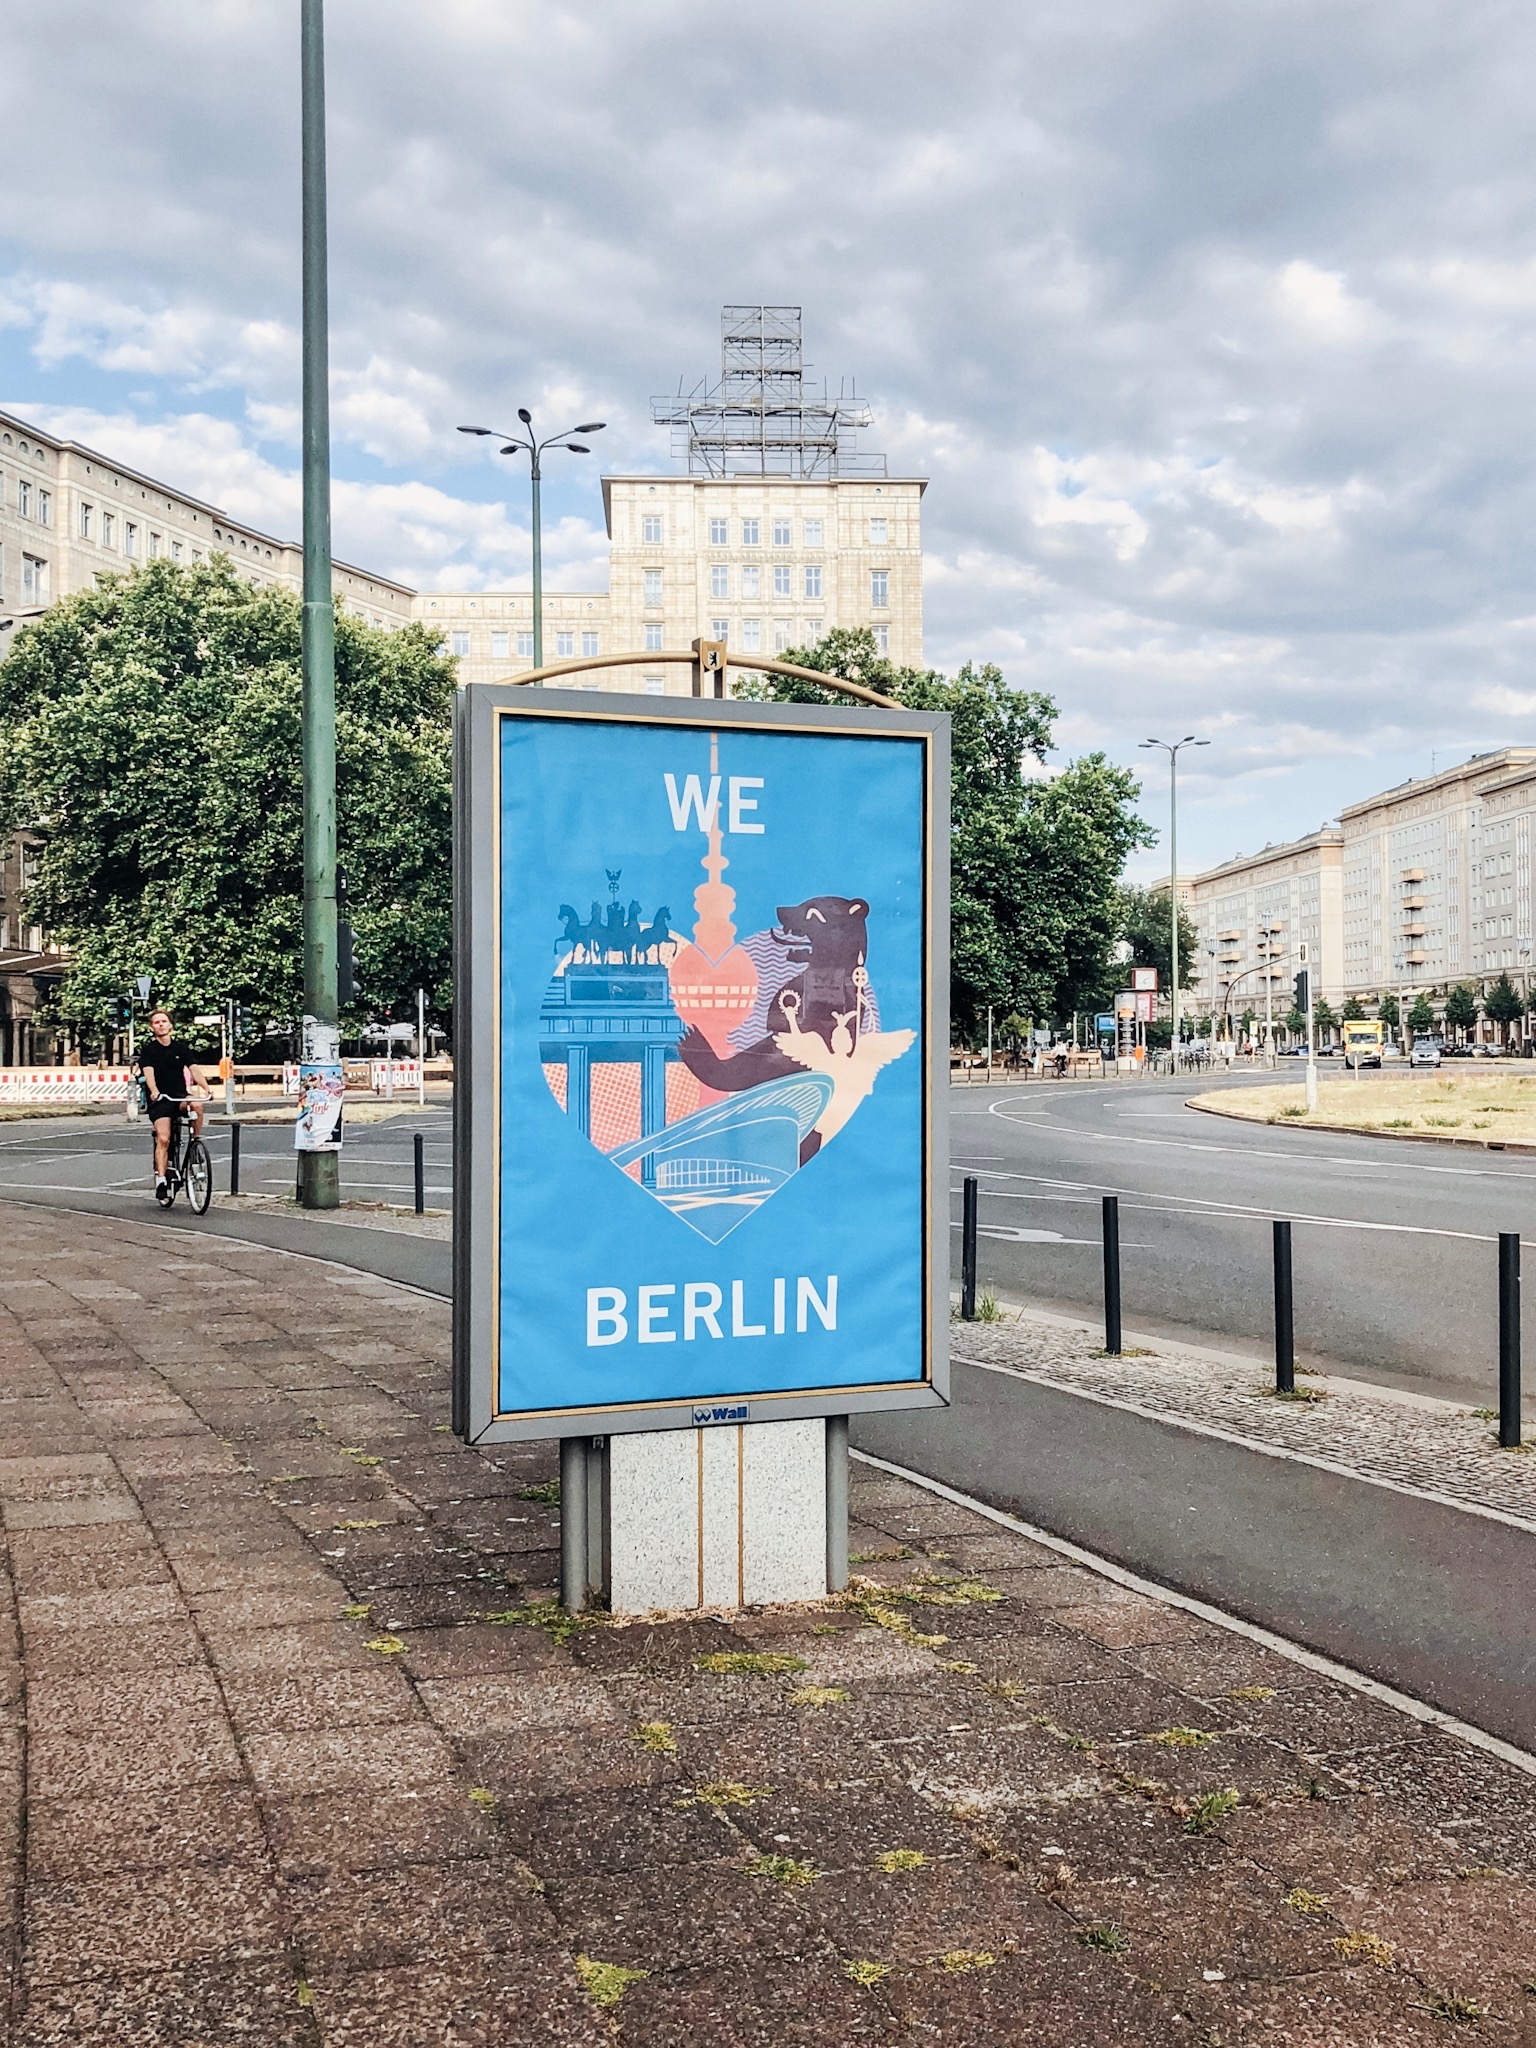 Life in Berlin: First Impressions | ChelseaDinen.com